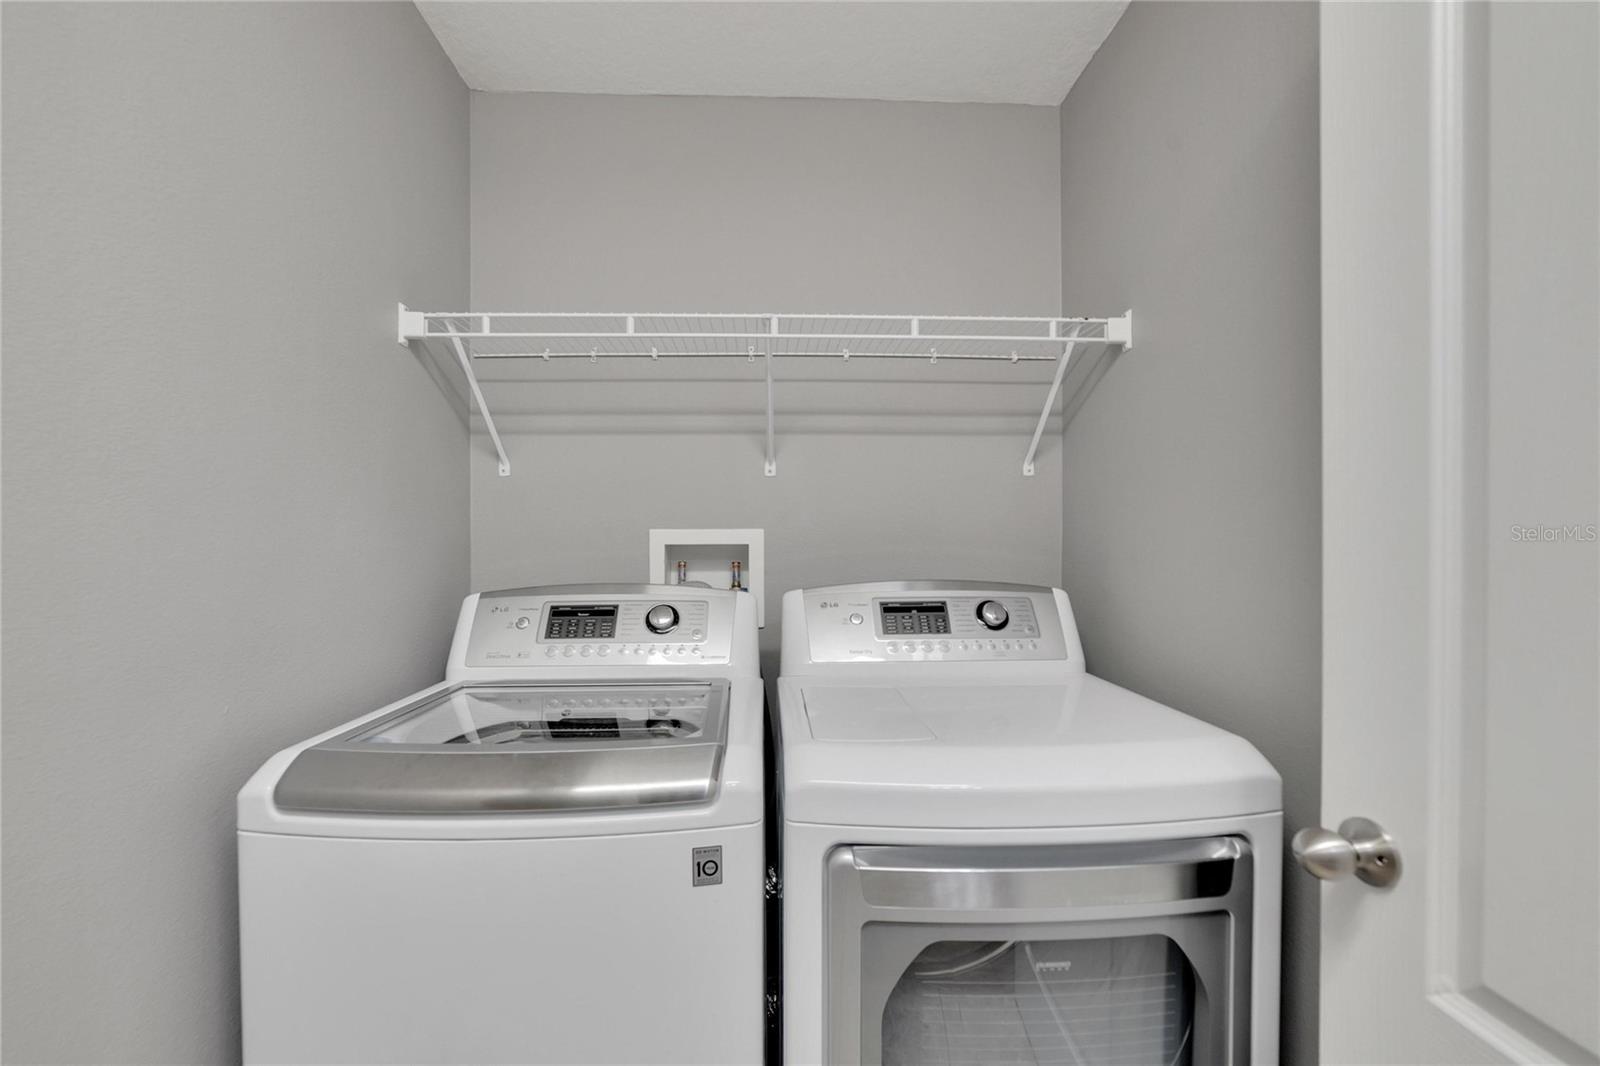 LG top tier washer and dryer